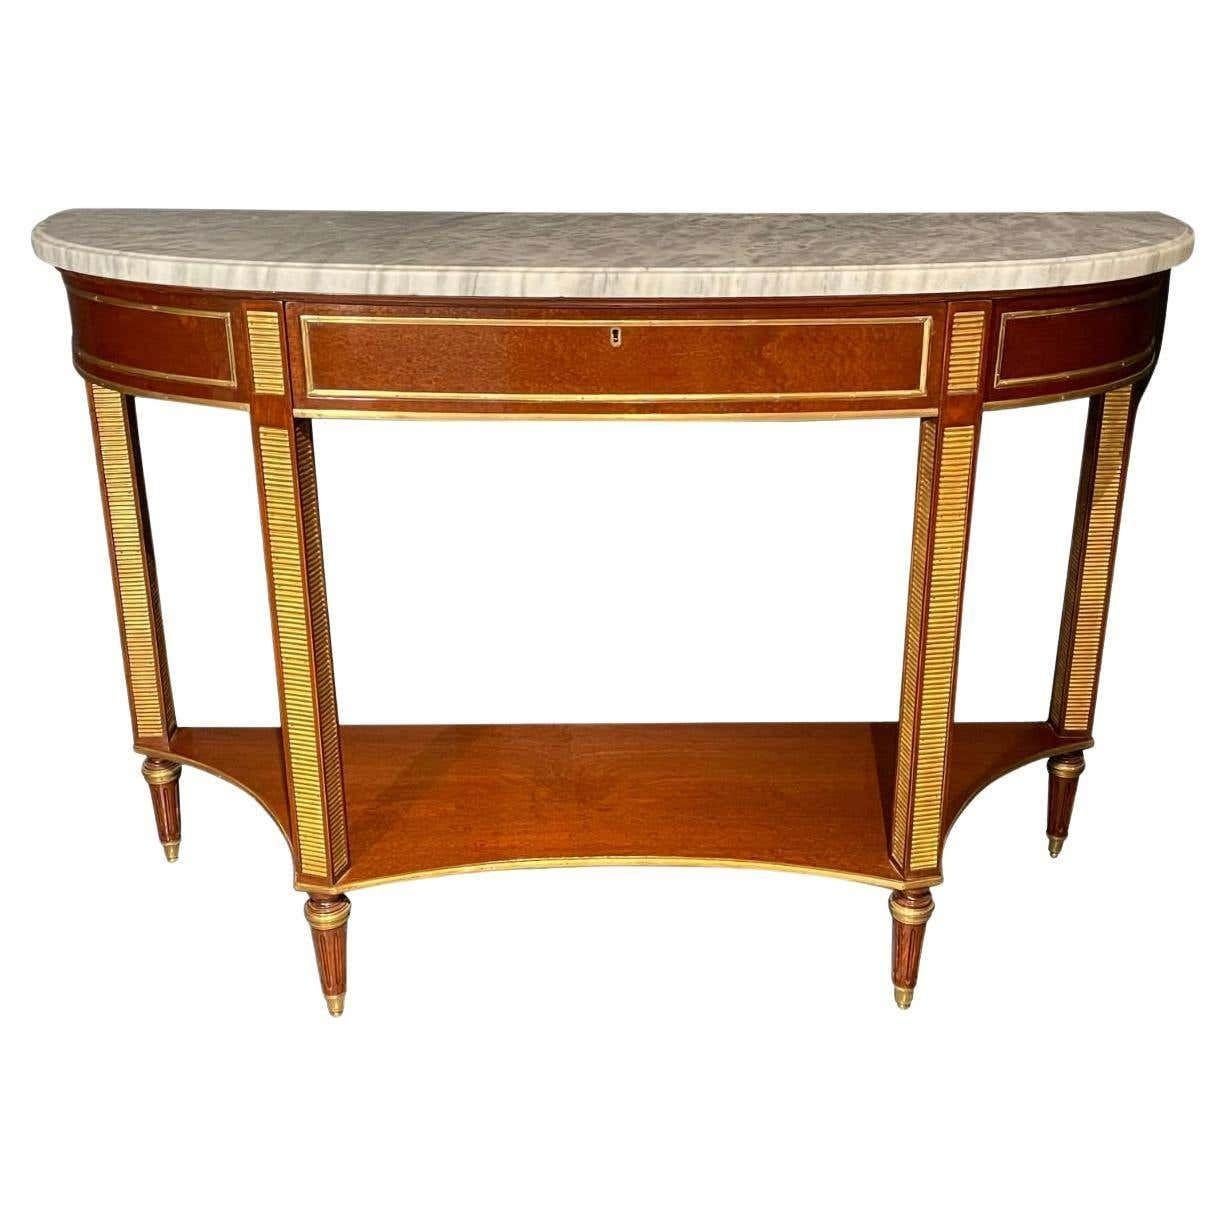 Russian neoclassical demilune marble top console, sideboard or sofa table having a tortoiseshell Veneer Finish. This stunning and sleek console is bronze mounted throughout having a thick Carrara white and gray veined marble top supported by a